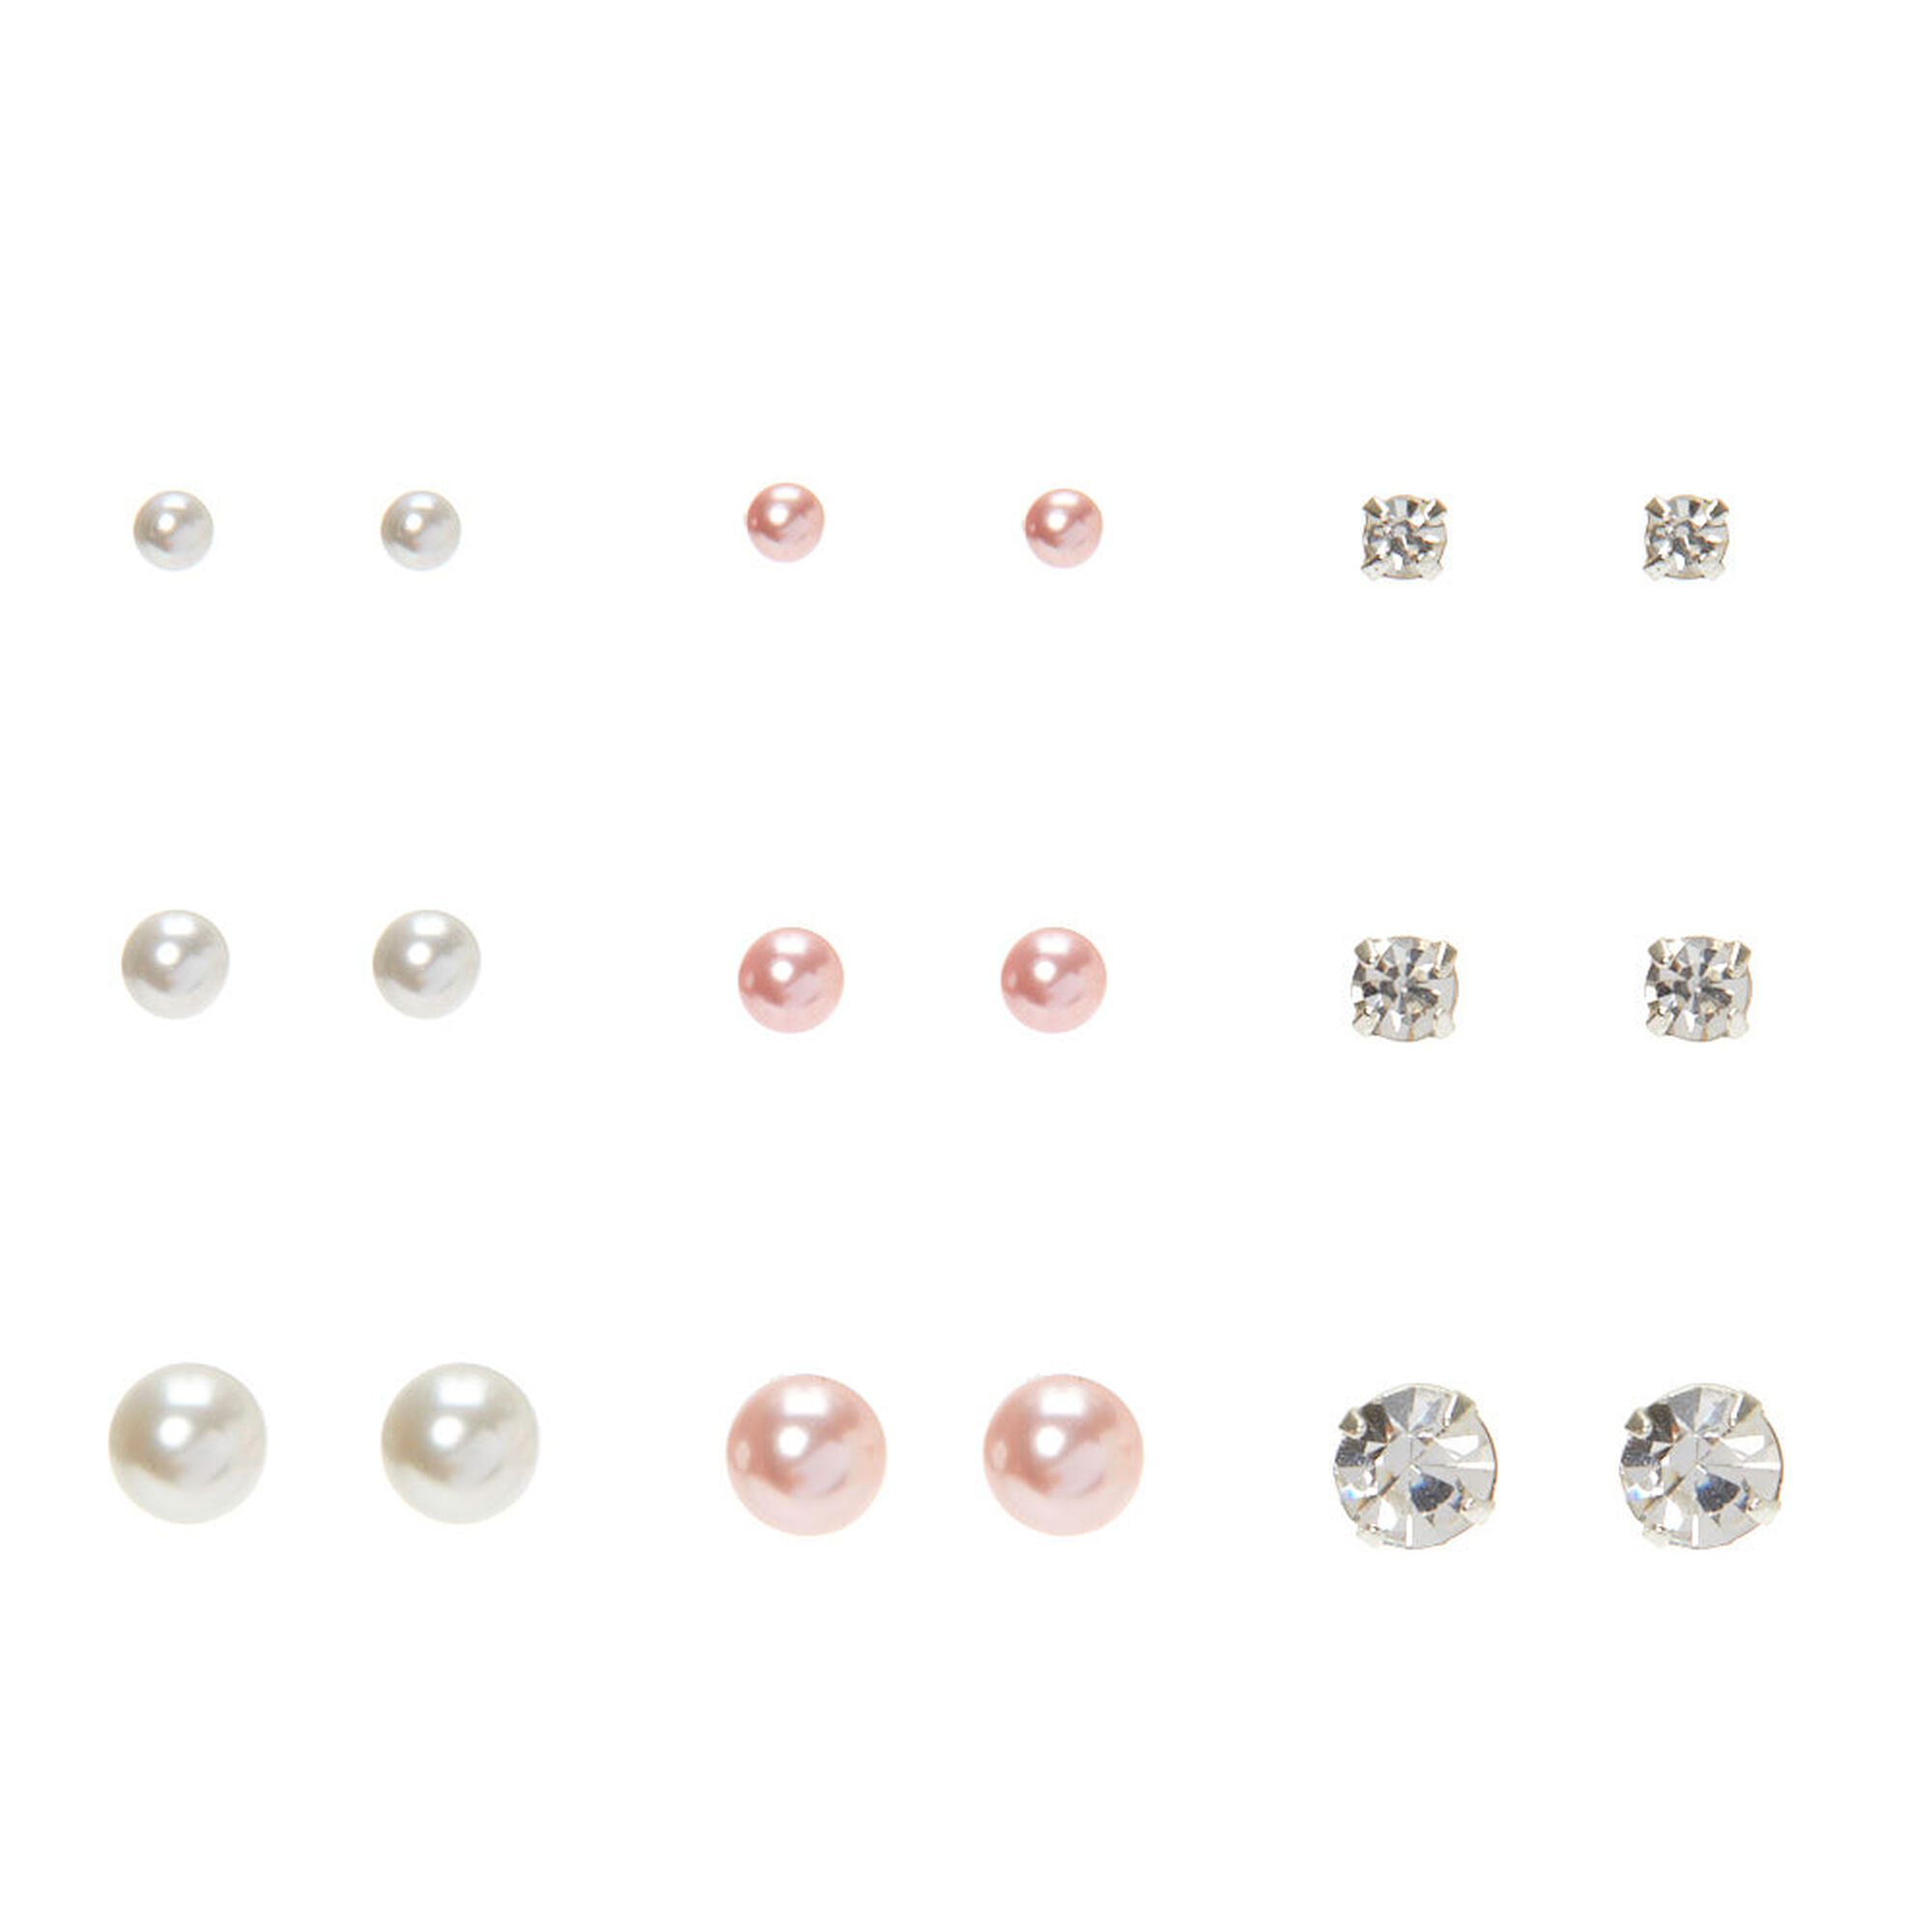 View Claires SilverTone Pearl Graduated Stud Earrings 9 Pack White information